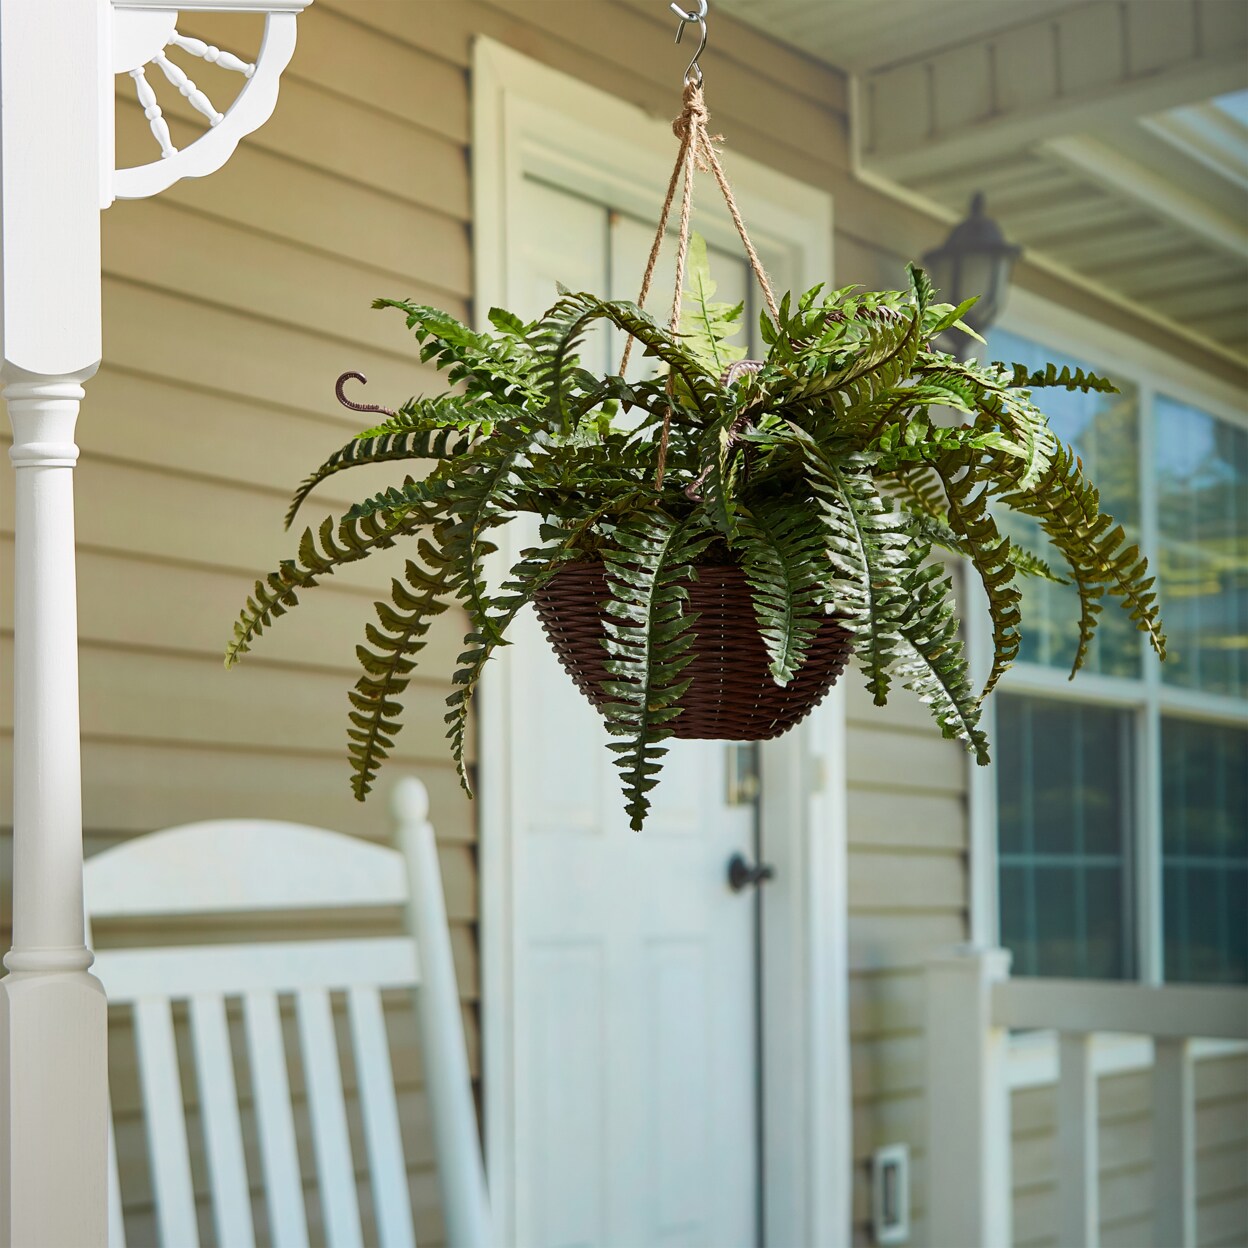 Pure Garden Faux Boston Fern Hanging Natural and Lifelike Artificial Arrangement and Imitation Greenery with Basket